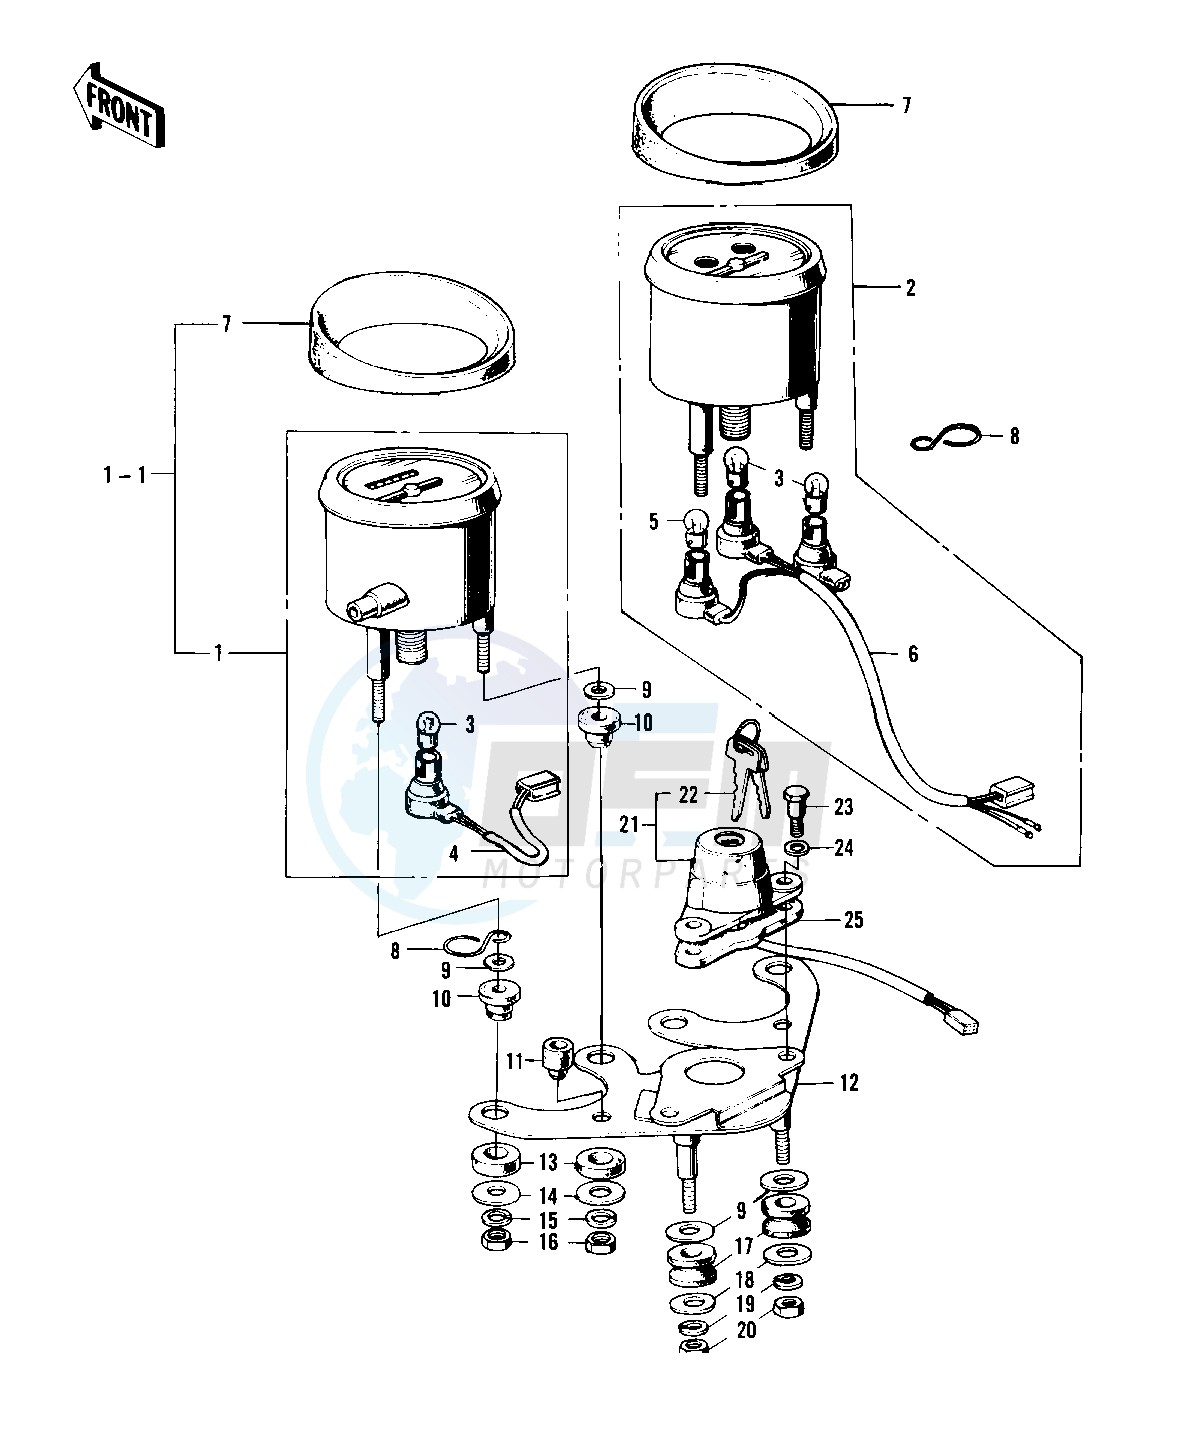 METERS_IGNITION SWITCH -- F9- - blueprint